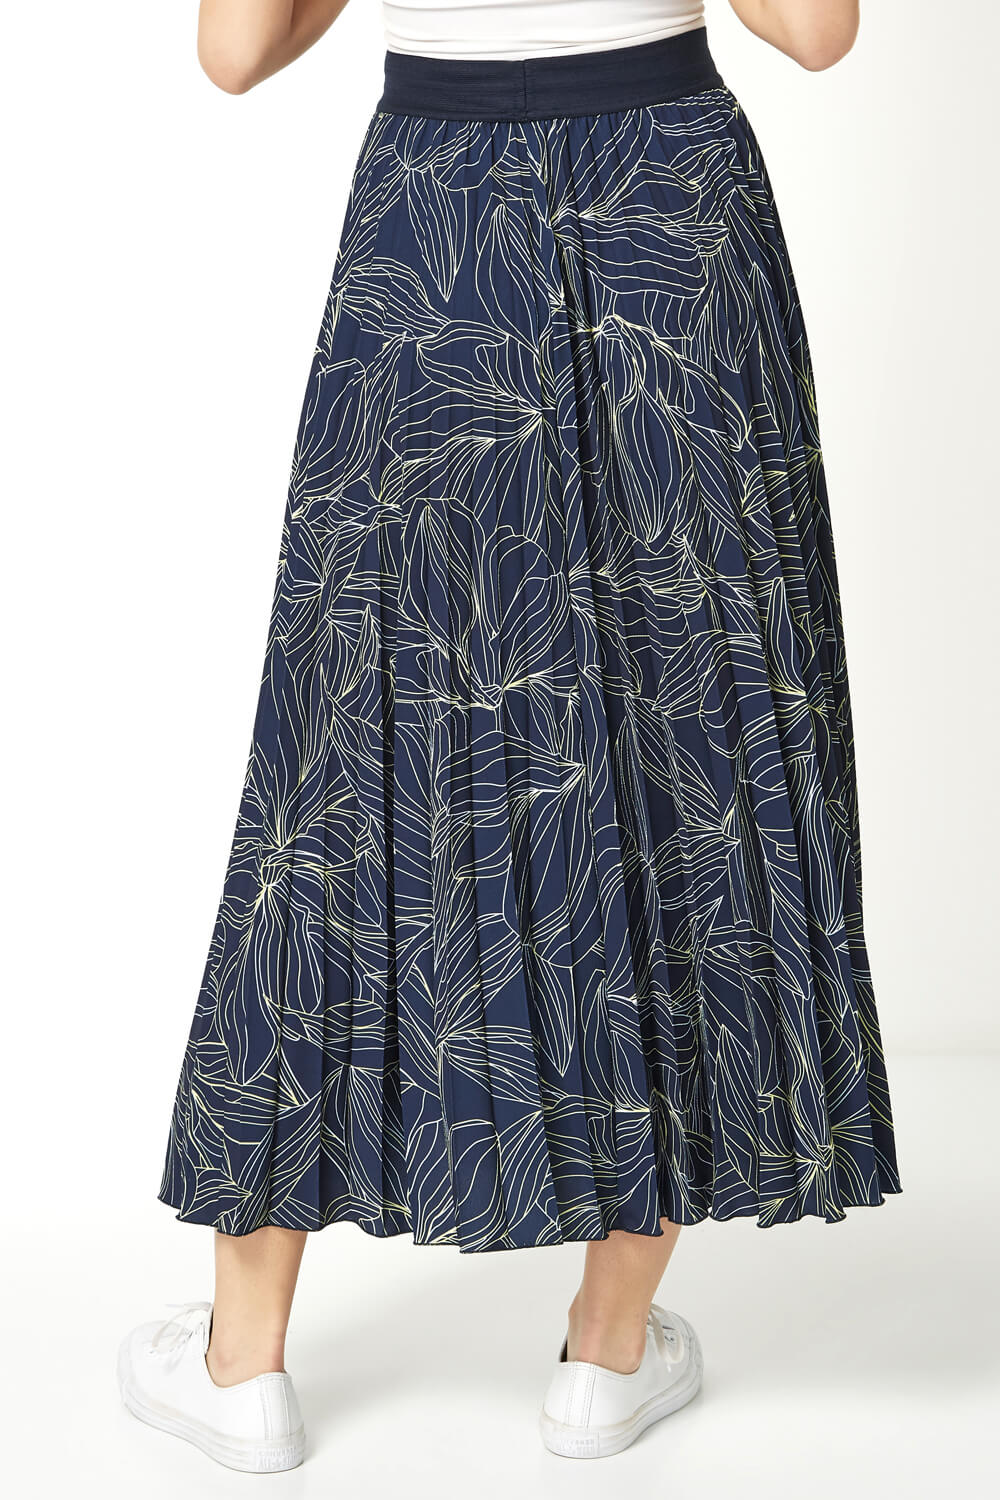 Navy  Linear Floral Print Pleated Midi Skirt, Image 3 of 5